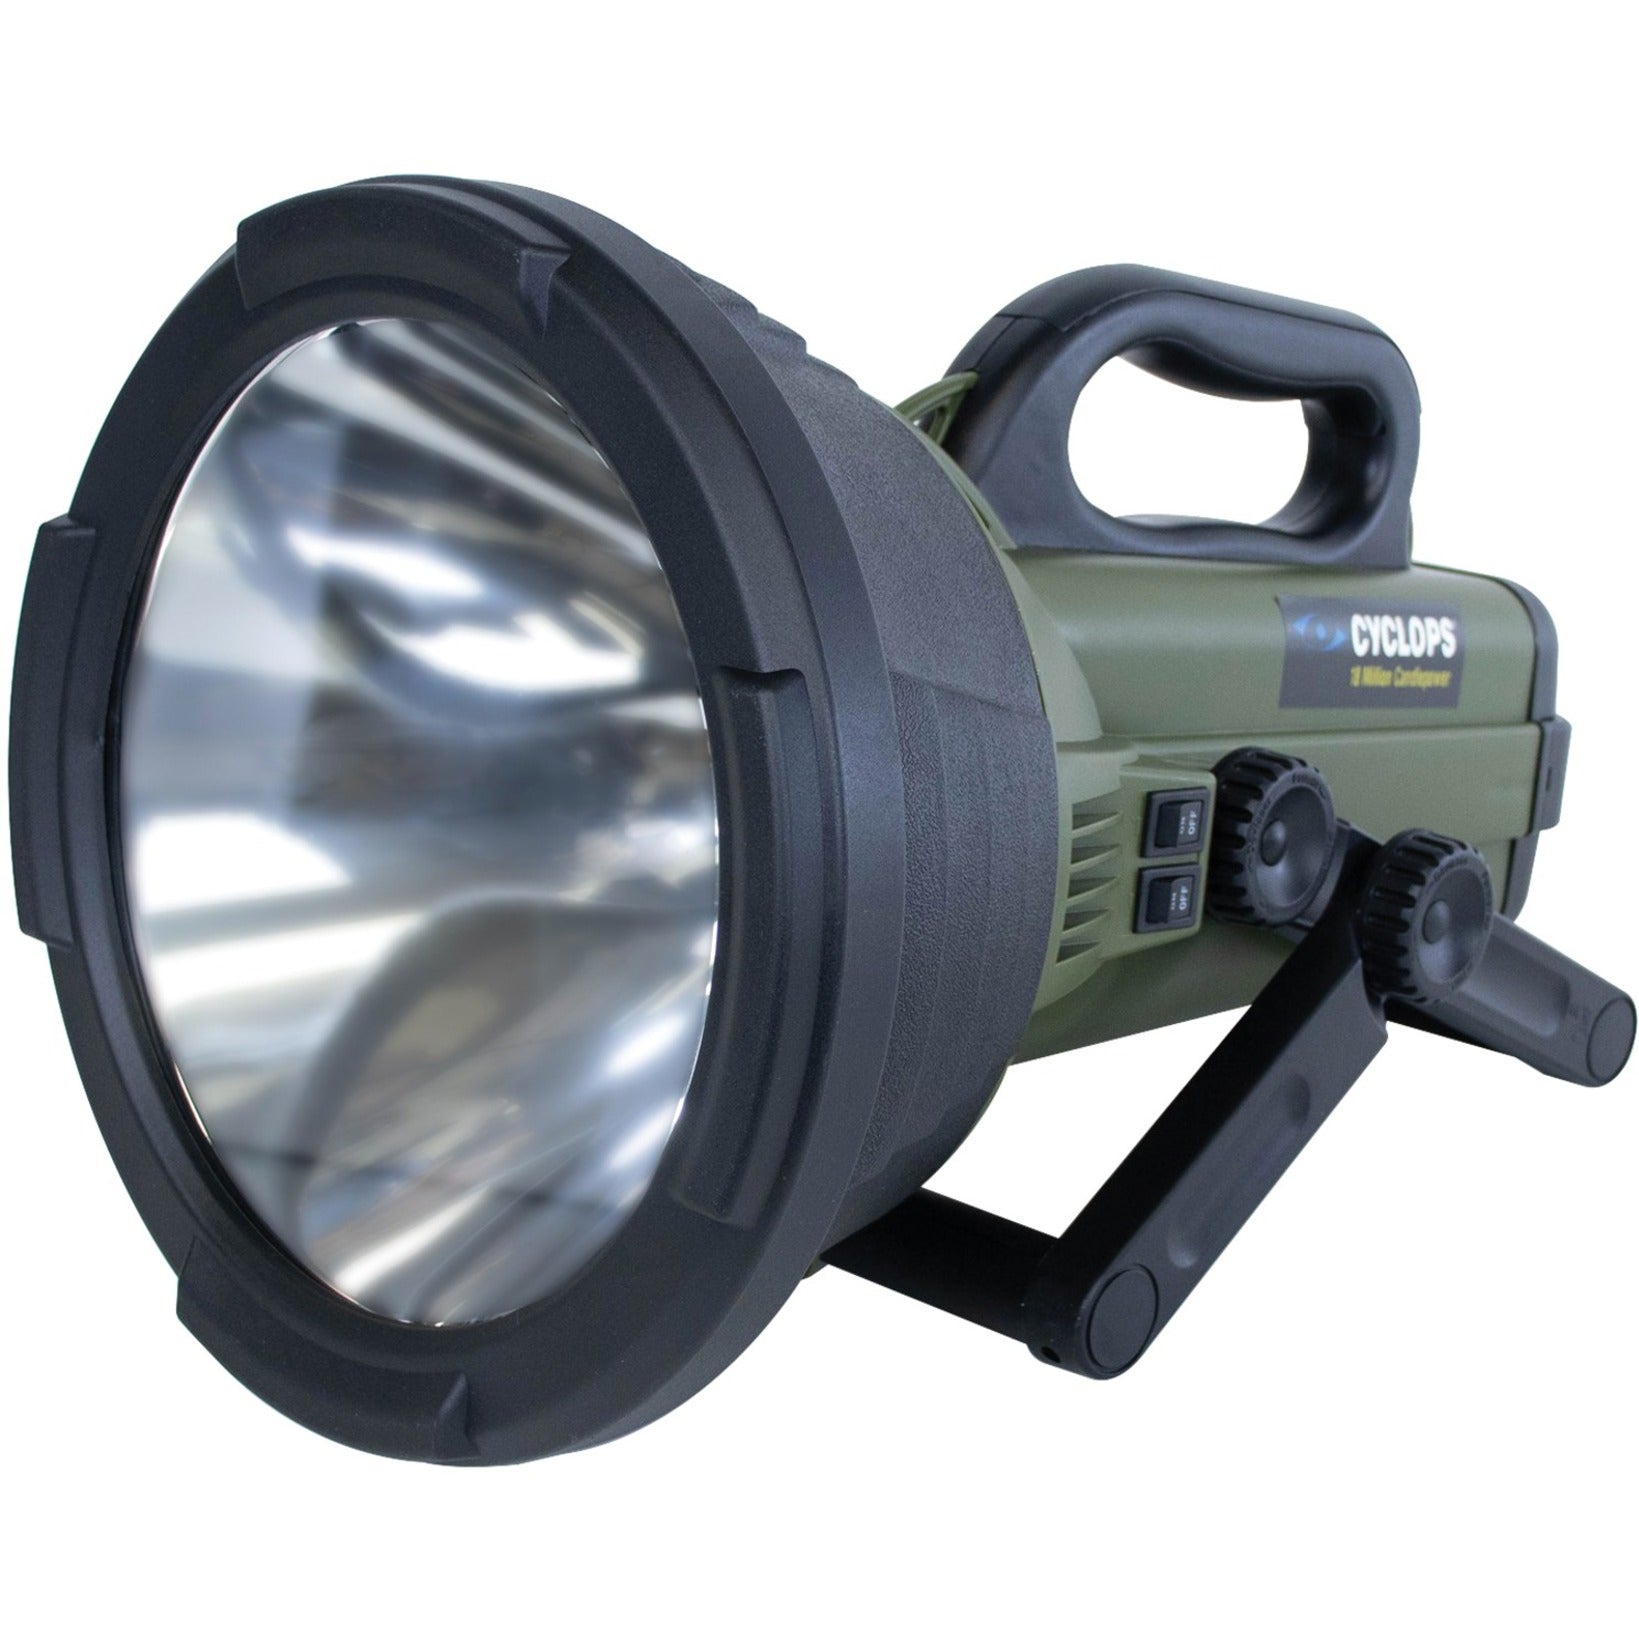 Cyclops C18MIL-FE Thor X Colossus Rechargeable Spotlight, Durable Rubberized Construction, Adjustable Stand